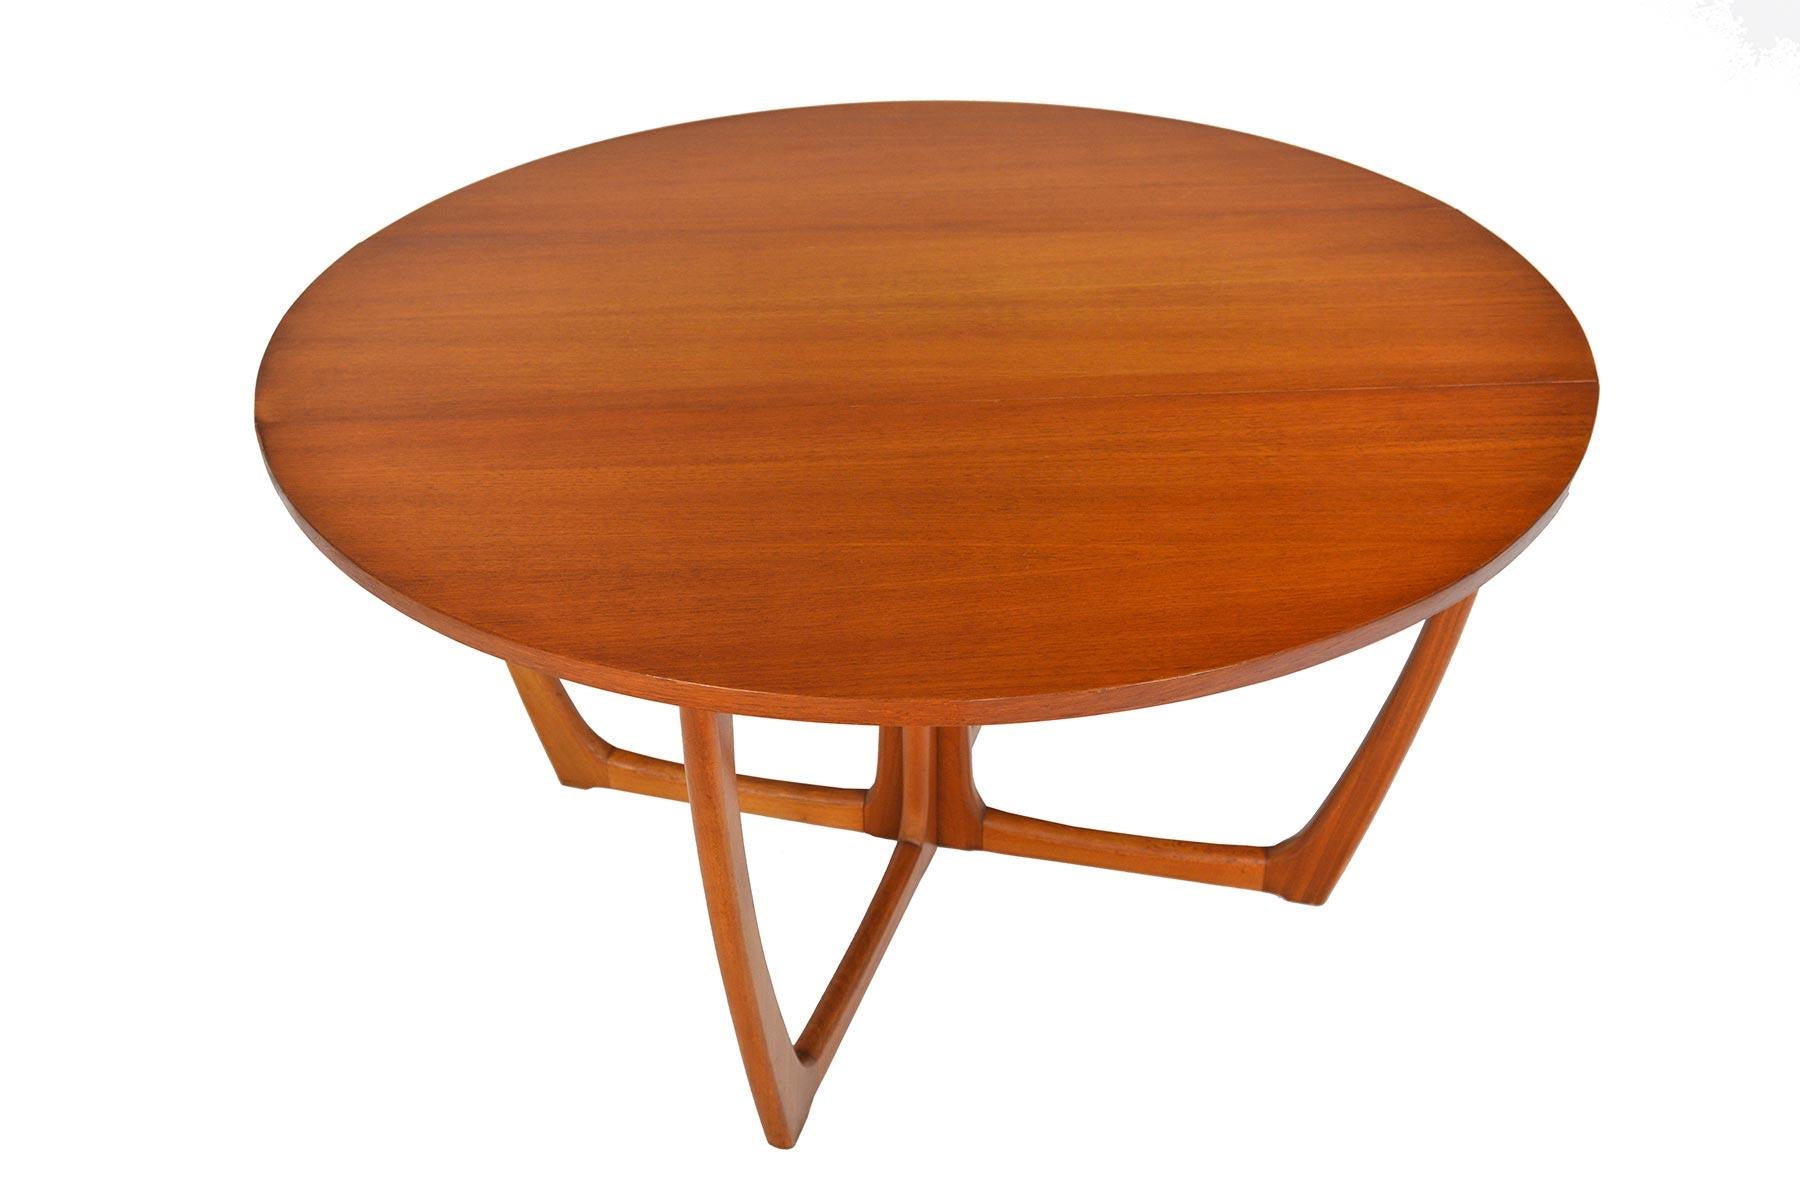 Scottish Round Drop-Leaf Dining Table by Beithcraft